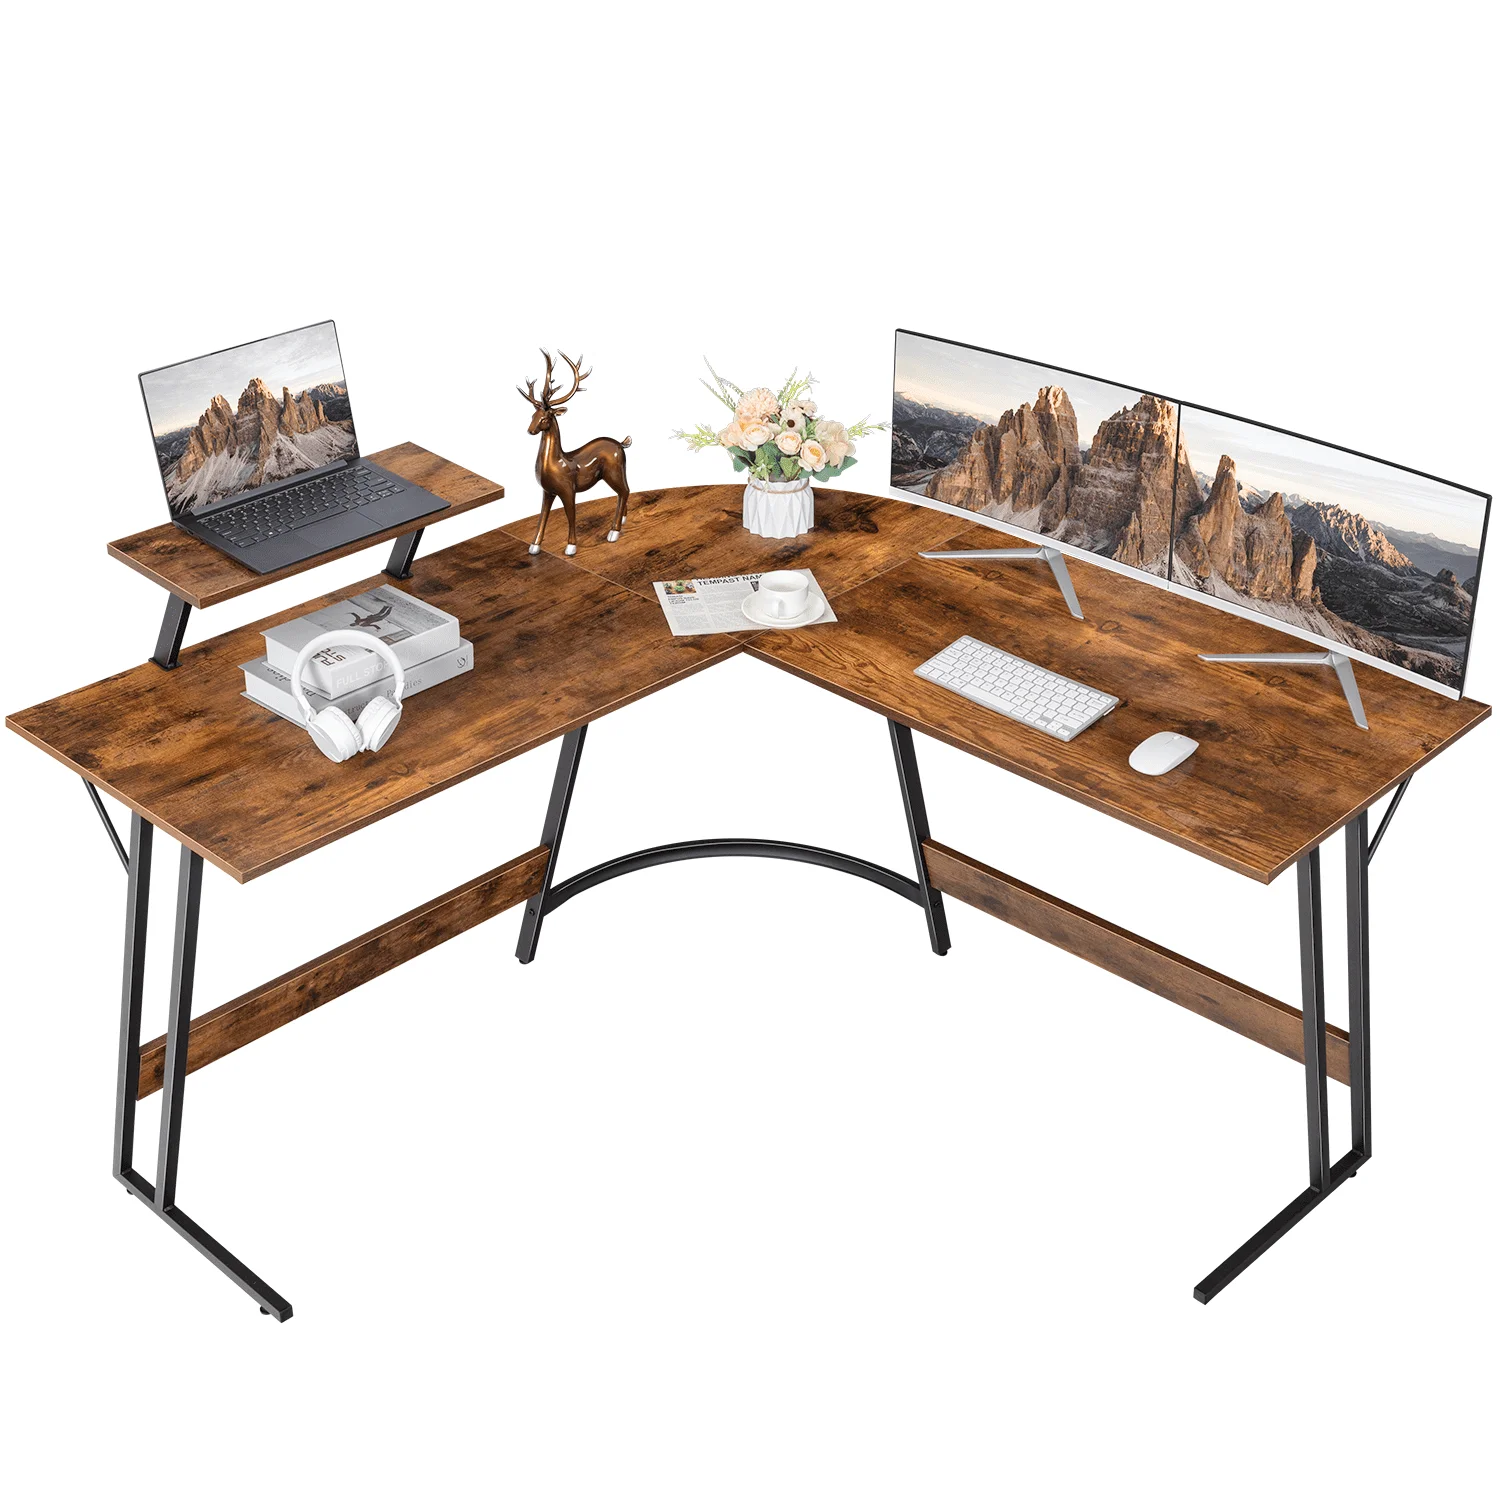 L-Shaped Computer Desk Modern Corner Desk with Small Table,Rustic Brown